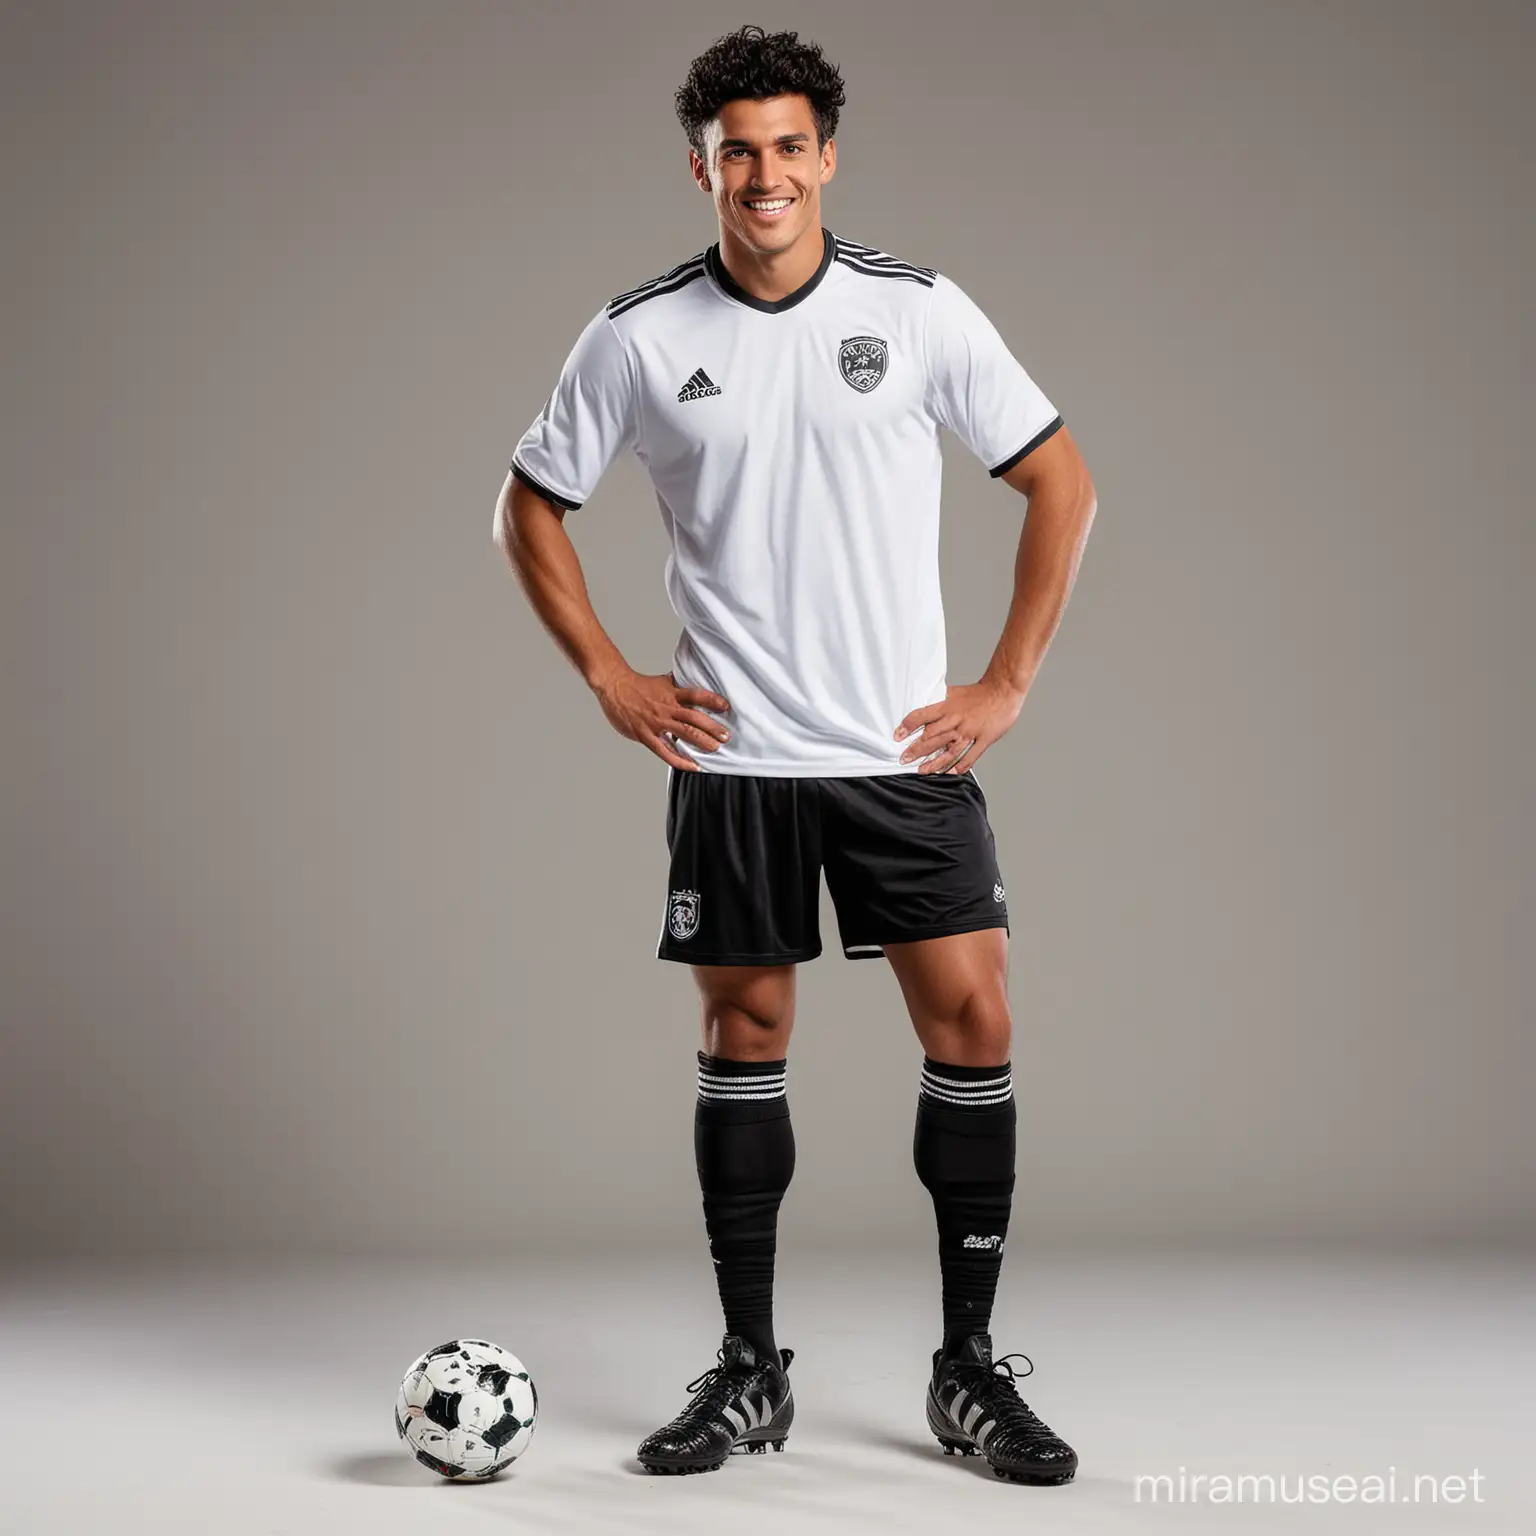 male, msoccer player, black head hair and black soccer boots, standing smiling, from head to feet